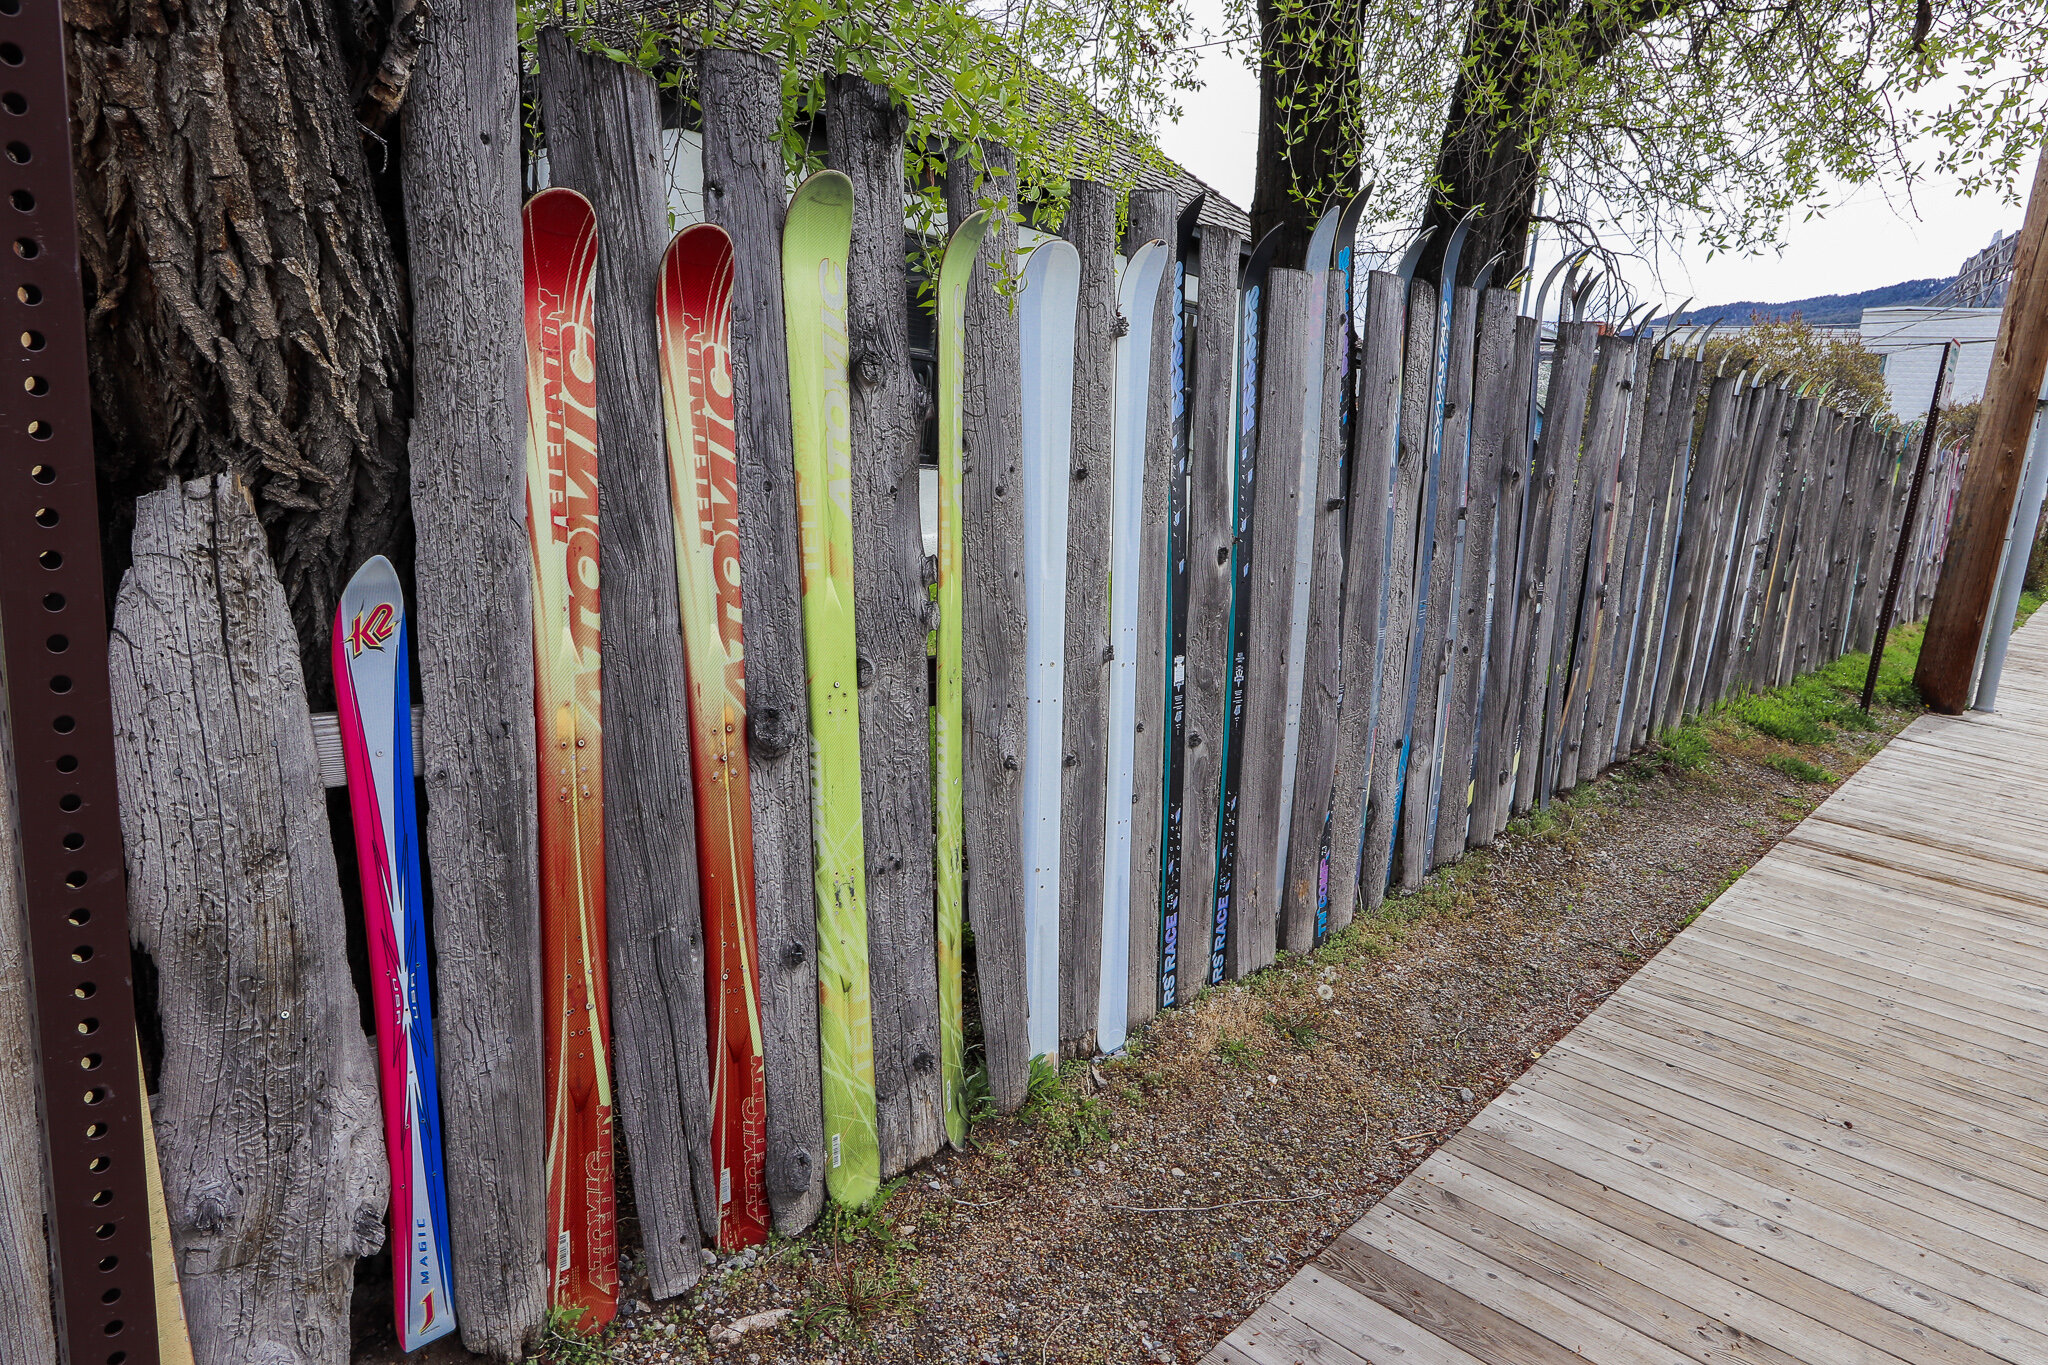  Such a creative use of old skis! 